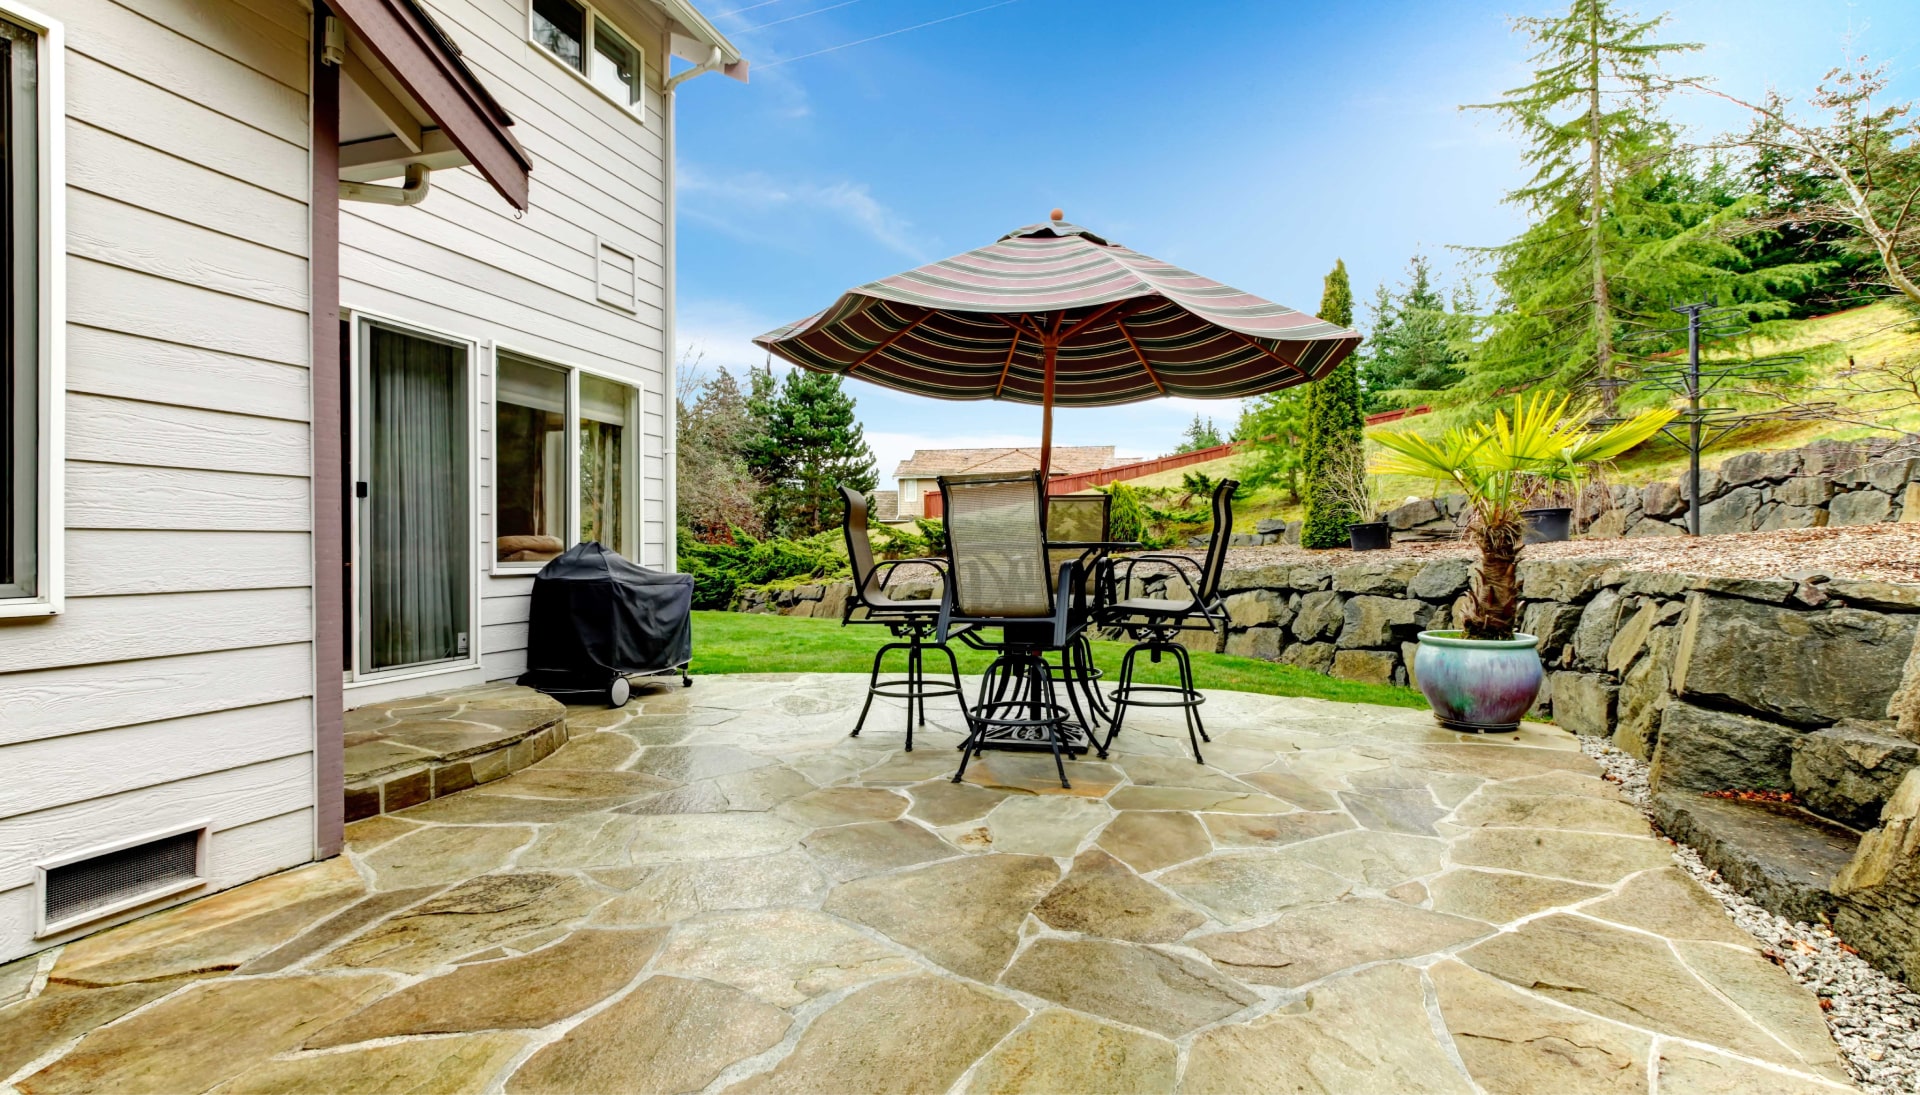 Beautifully Textured and Patterned Concrete Patios in Temecula, California